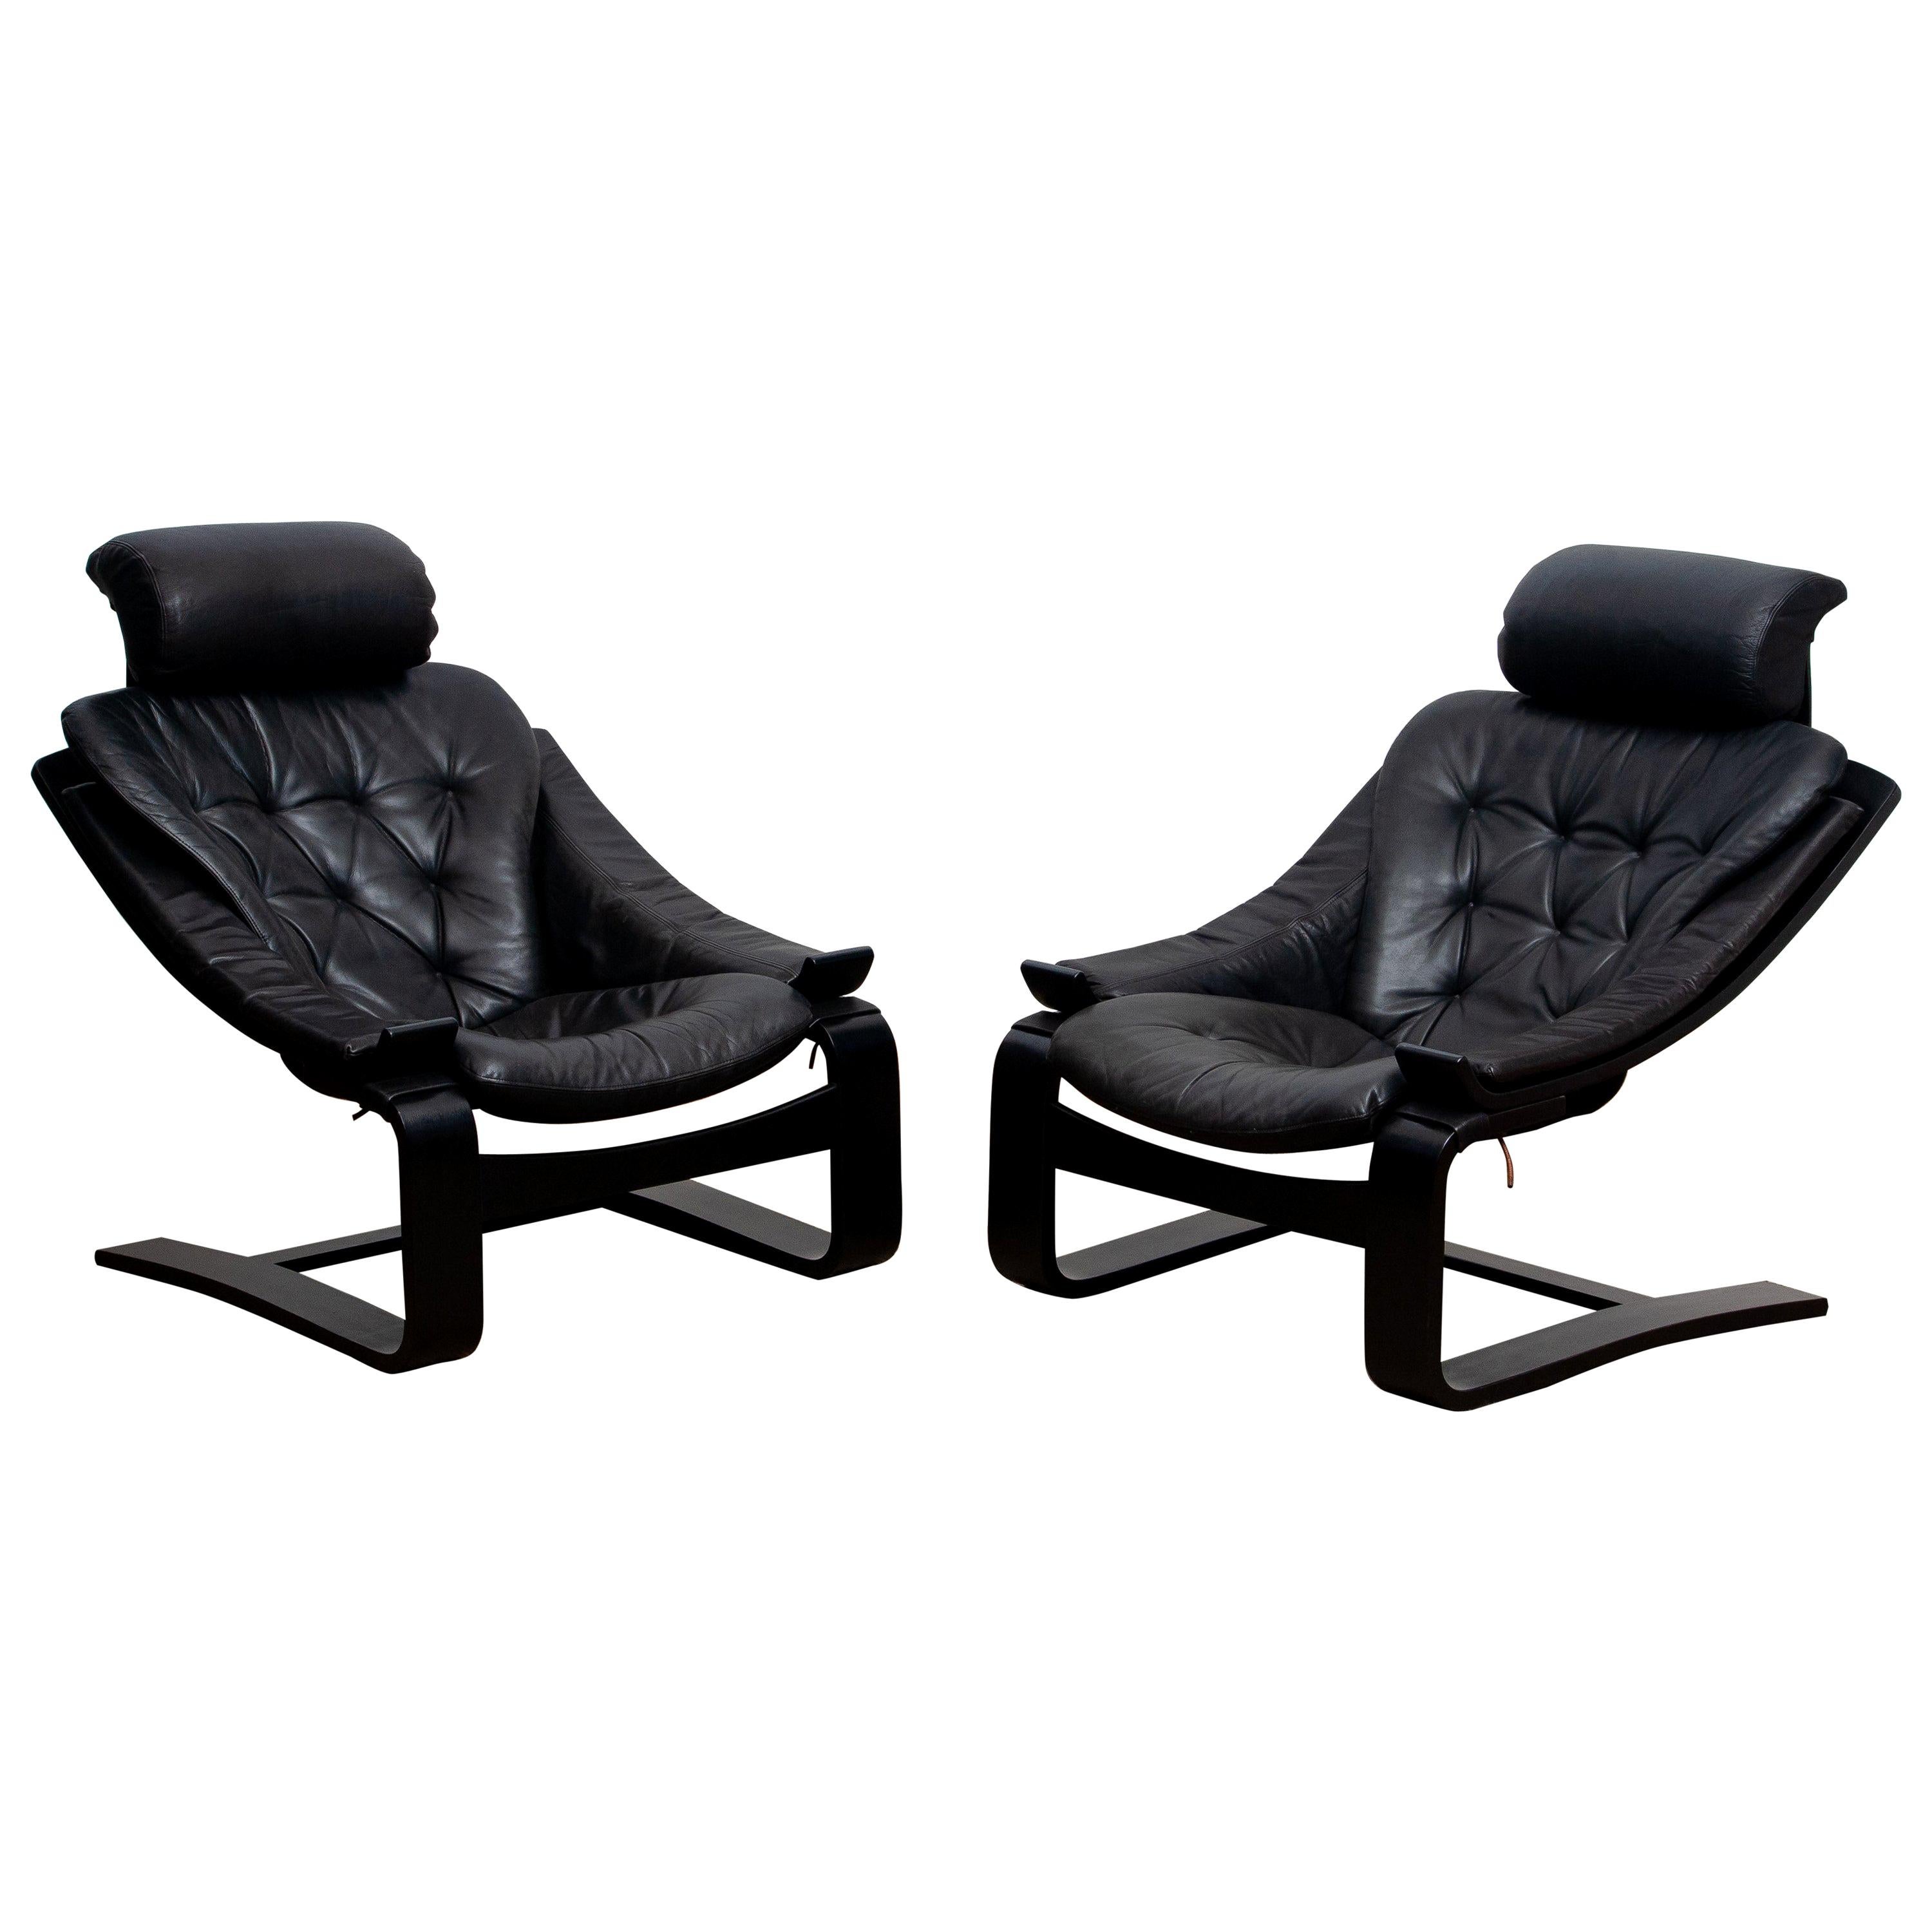 Set of two extremely comfortable black lounge / easy chairs, model 